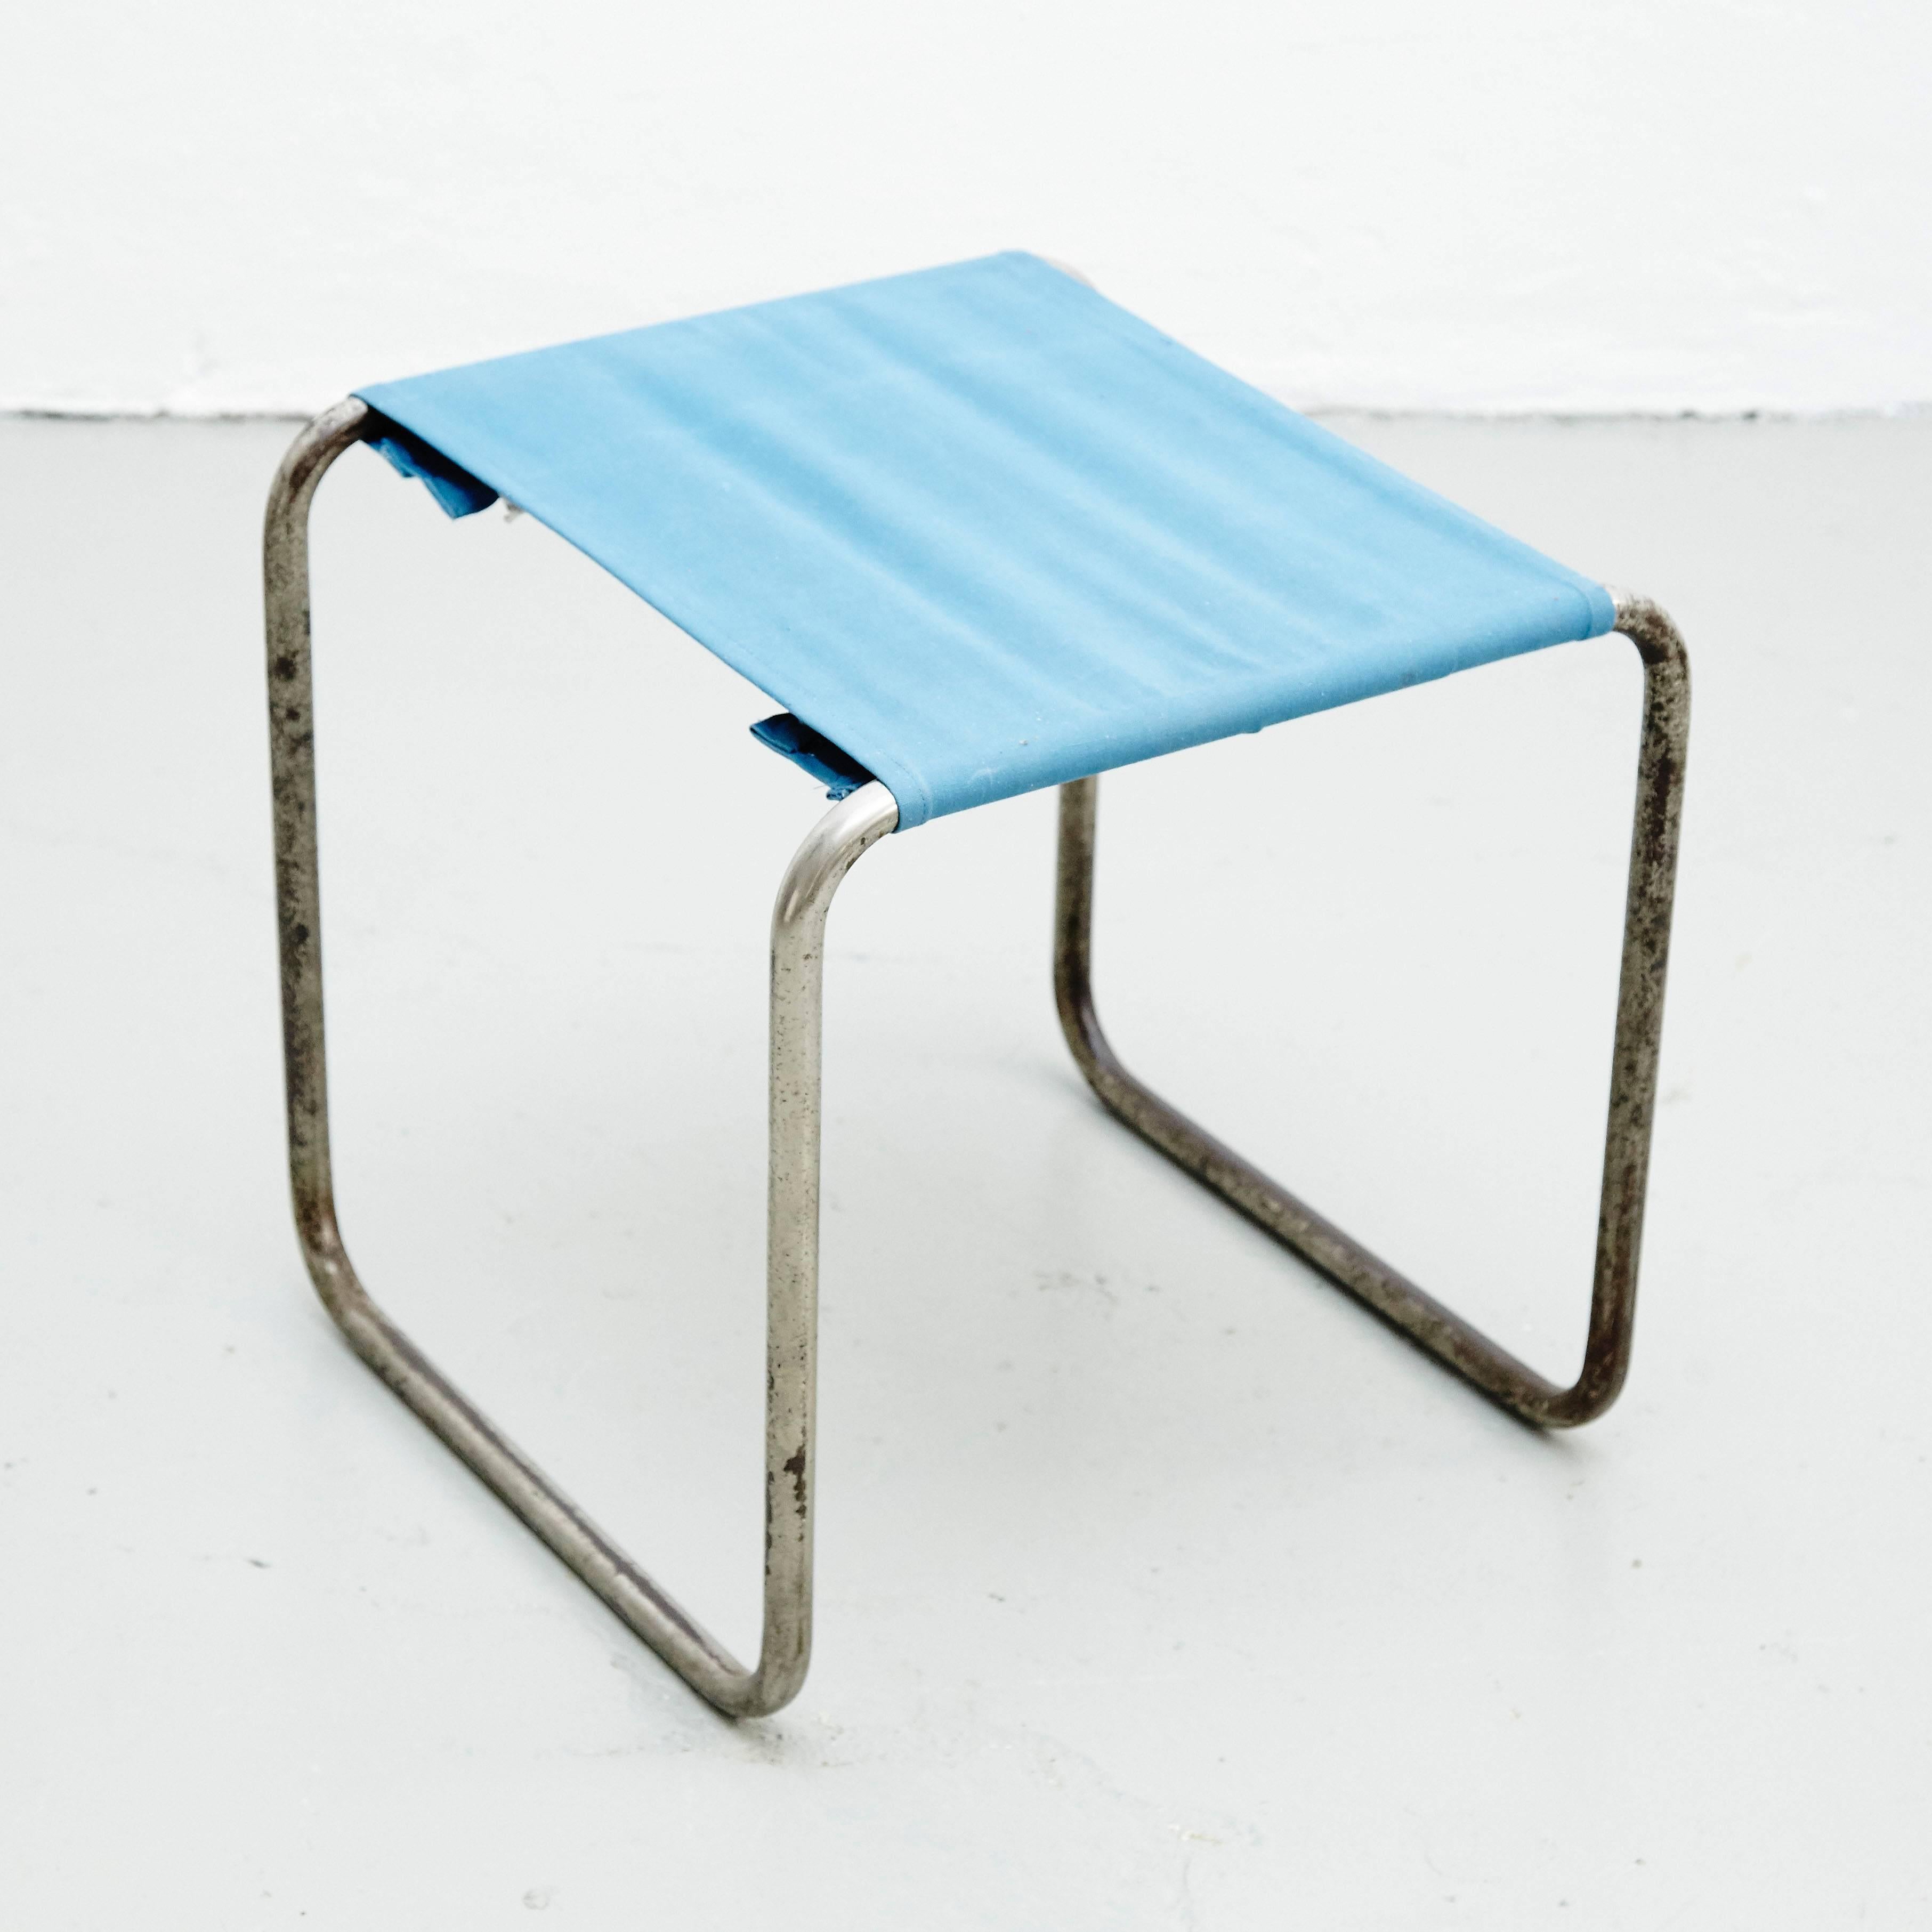 German Marcel Breuer B9T Stool for Thonet with Blue Fabric and Metal Tube, circa 1930